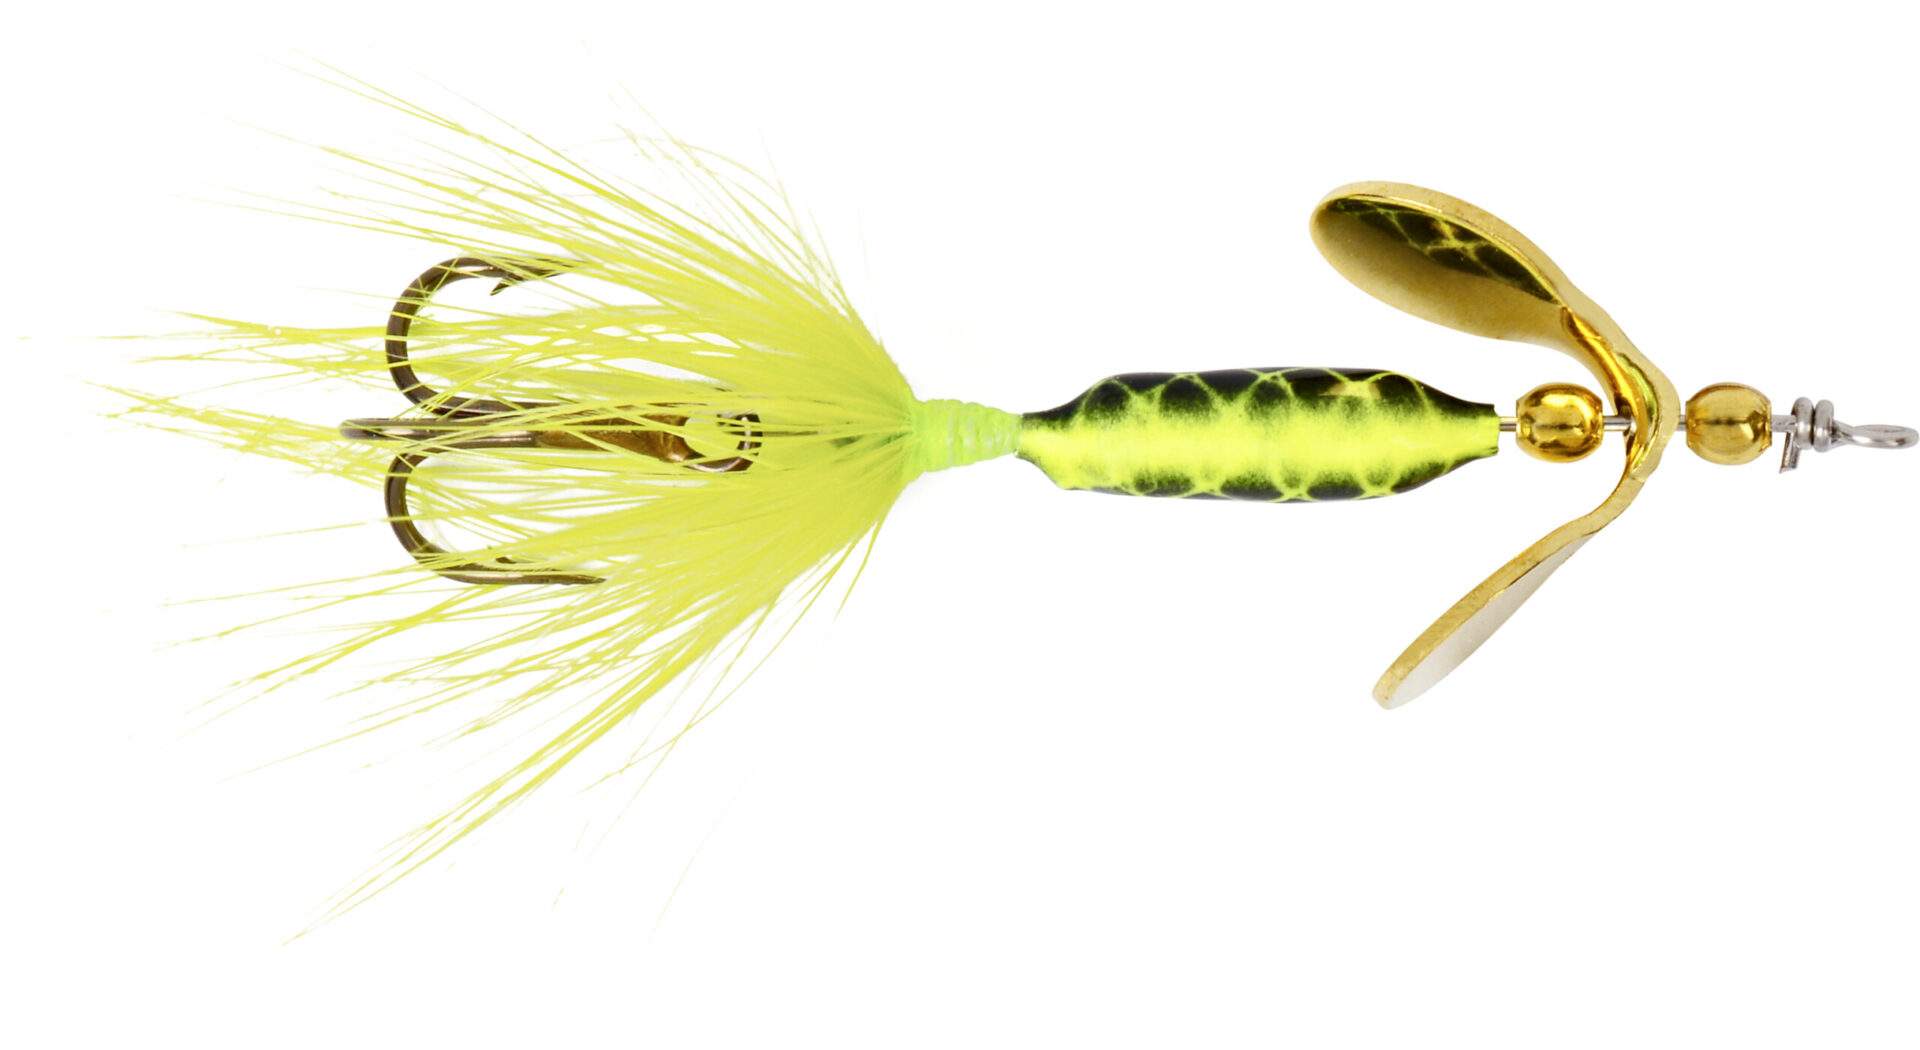 Prop Blade Rooster Tail®: 1/32 oz. - Treble - Yakima Bait